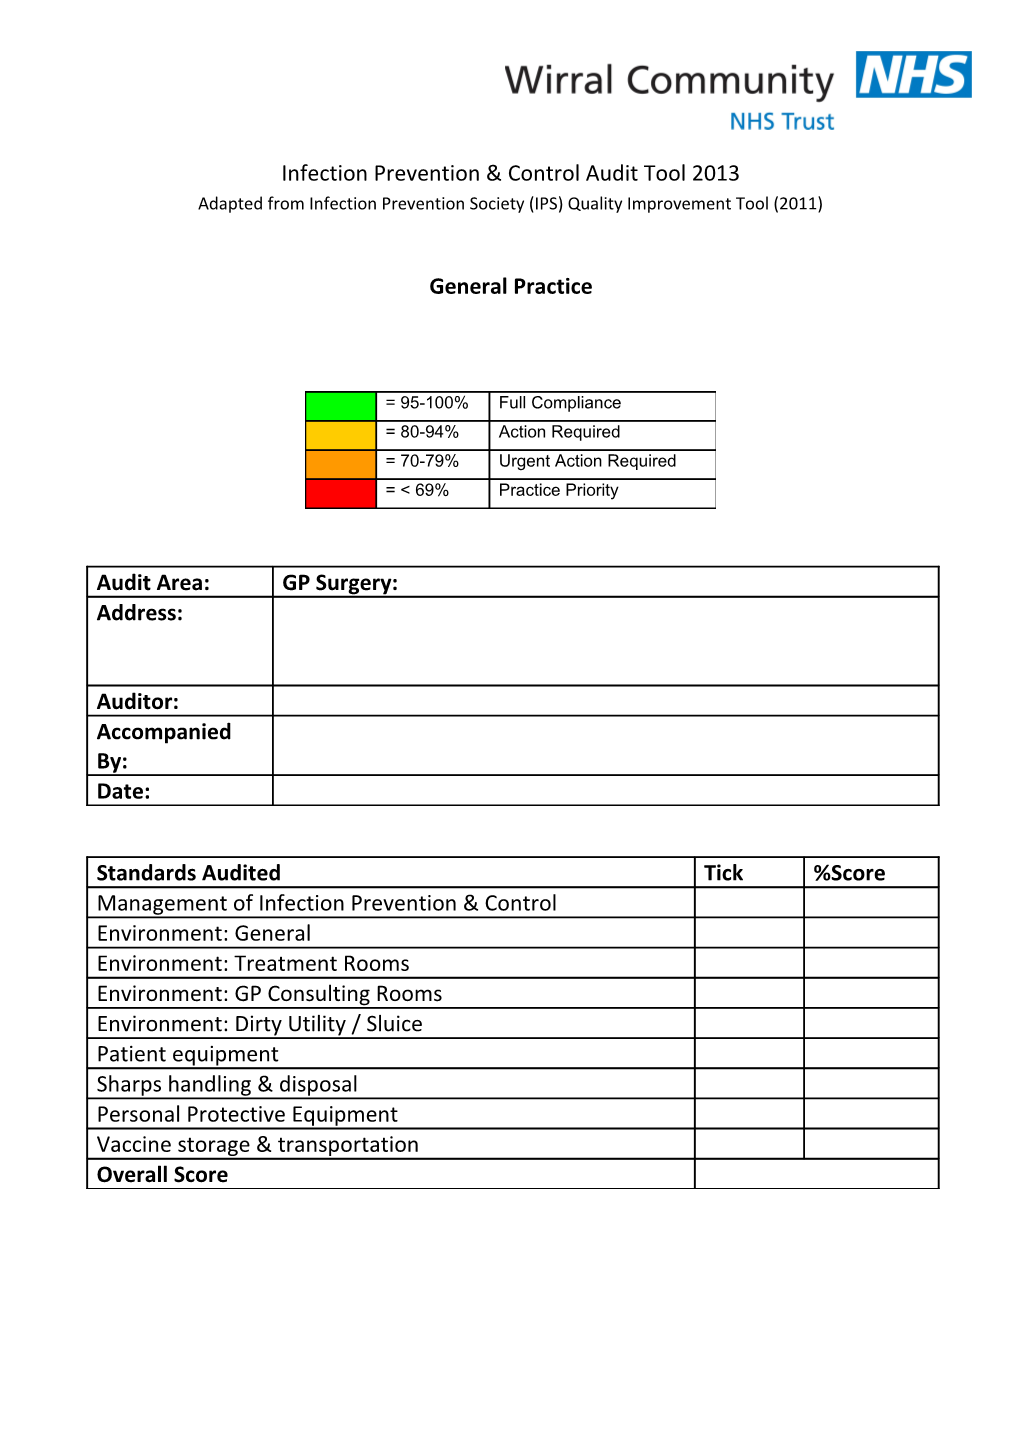 Infection Prevention & Control Audit Tool 2013